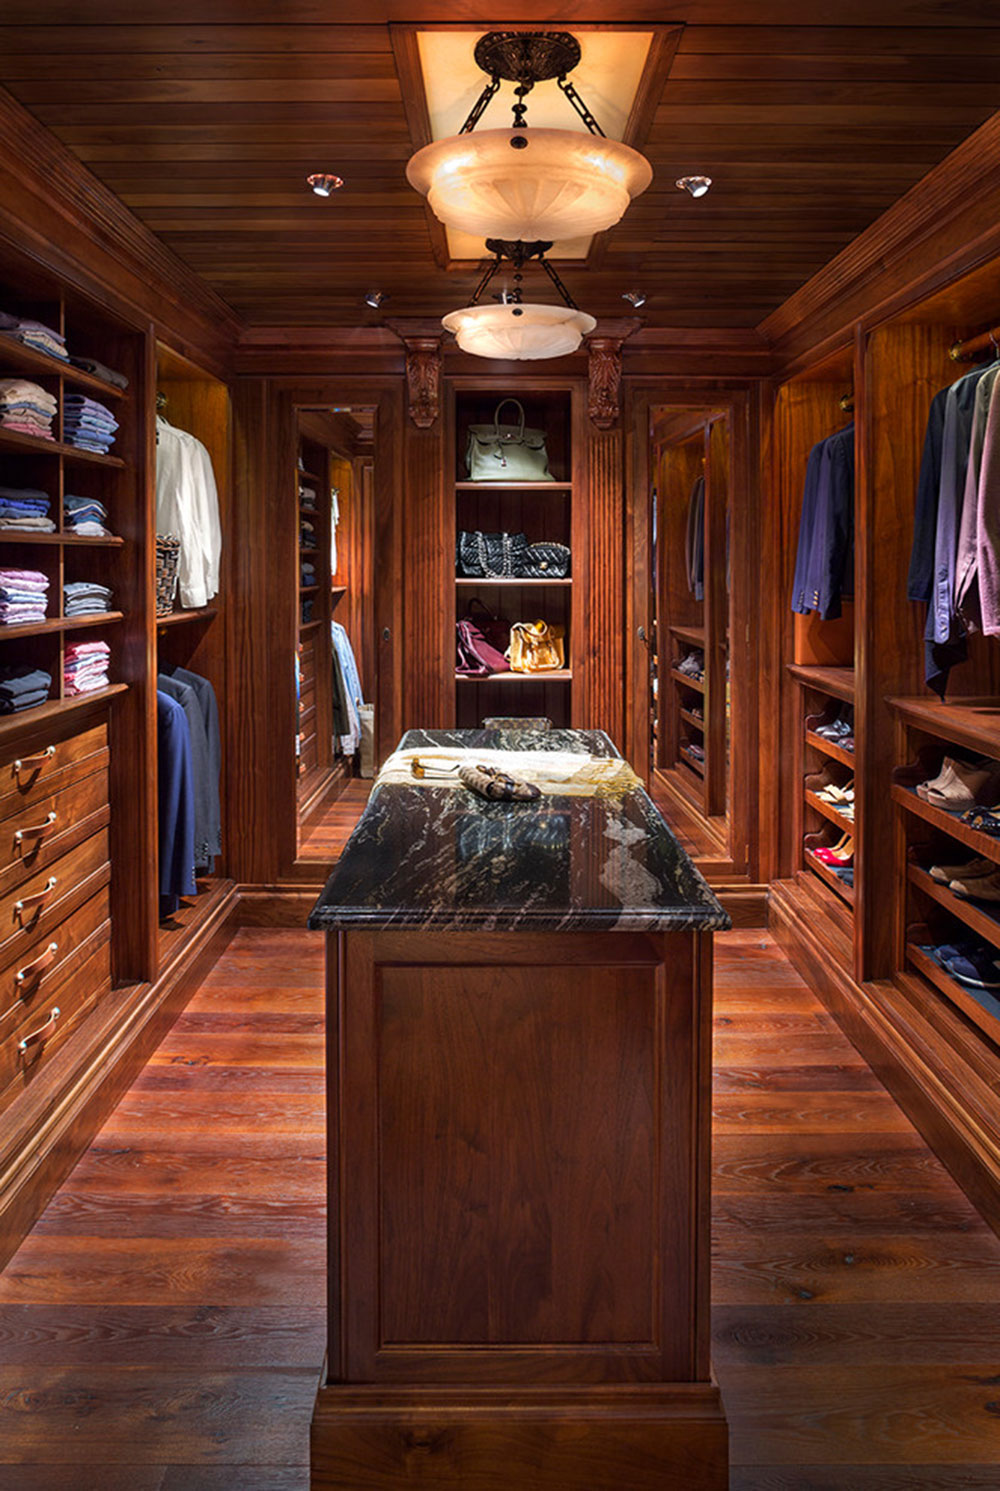 wc14 Cool walk-in closet ideas you should have in your home